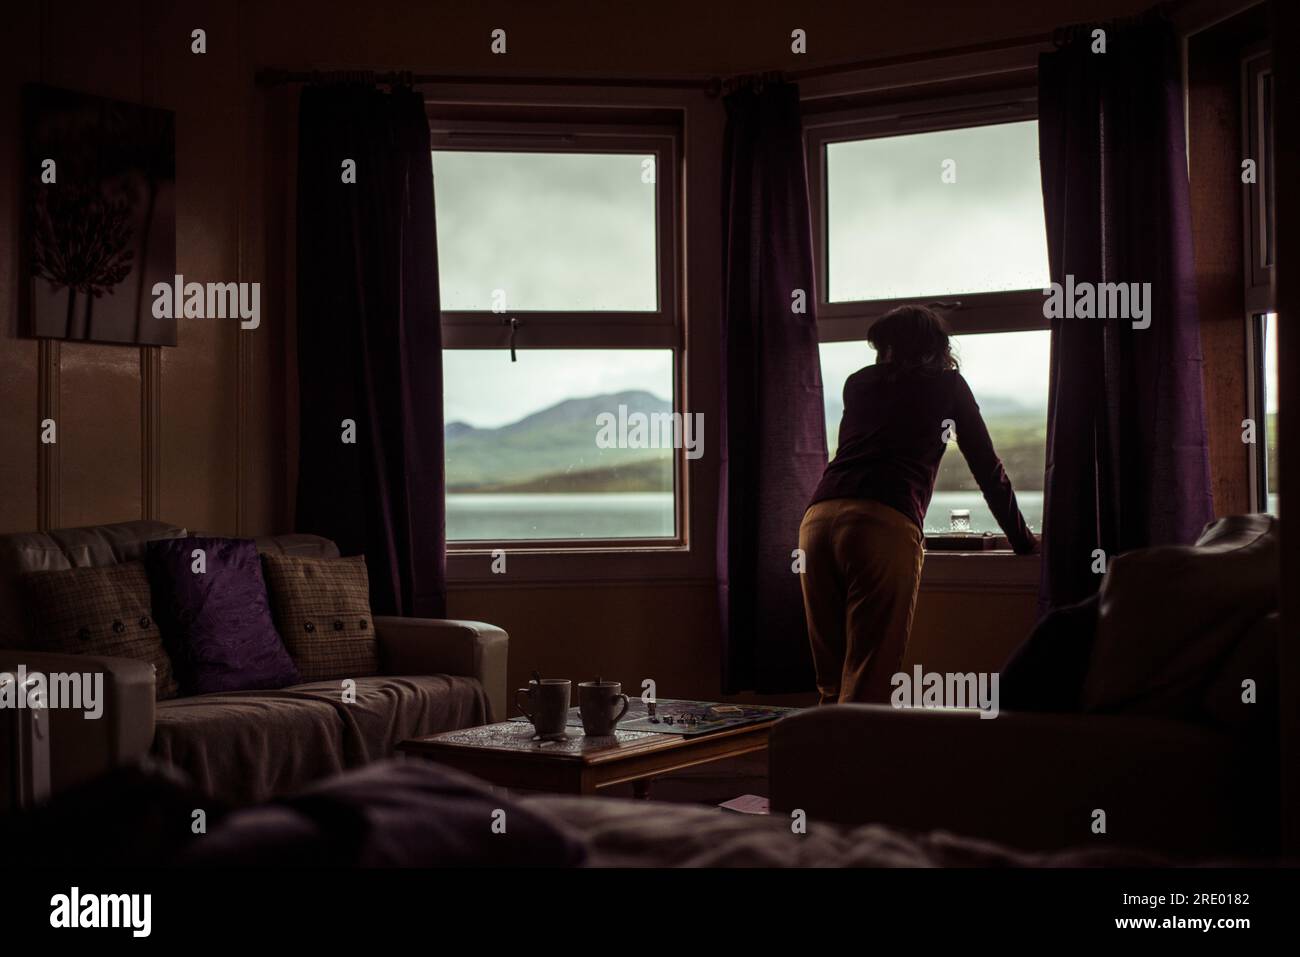 Silhouette of girl looking out window at mountain view Stock Photo